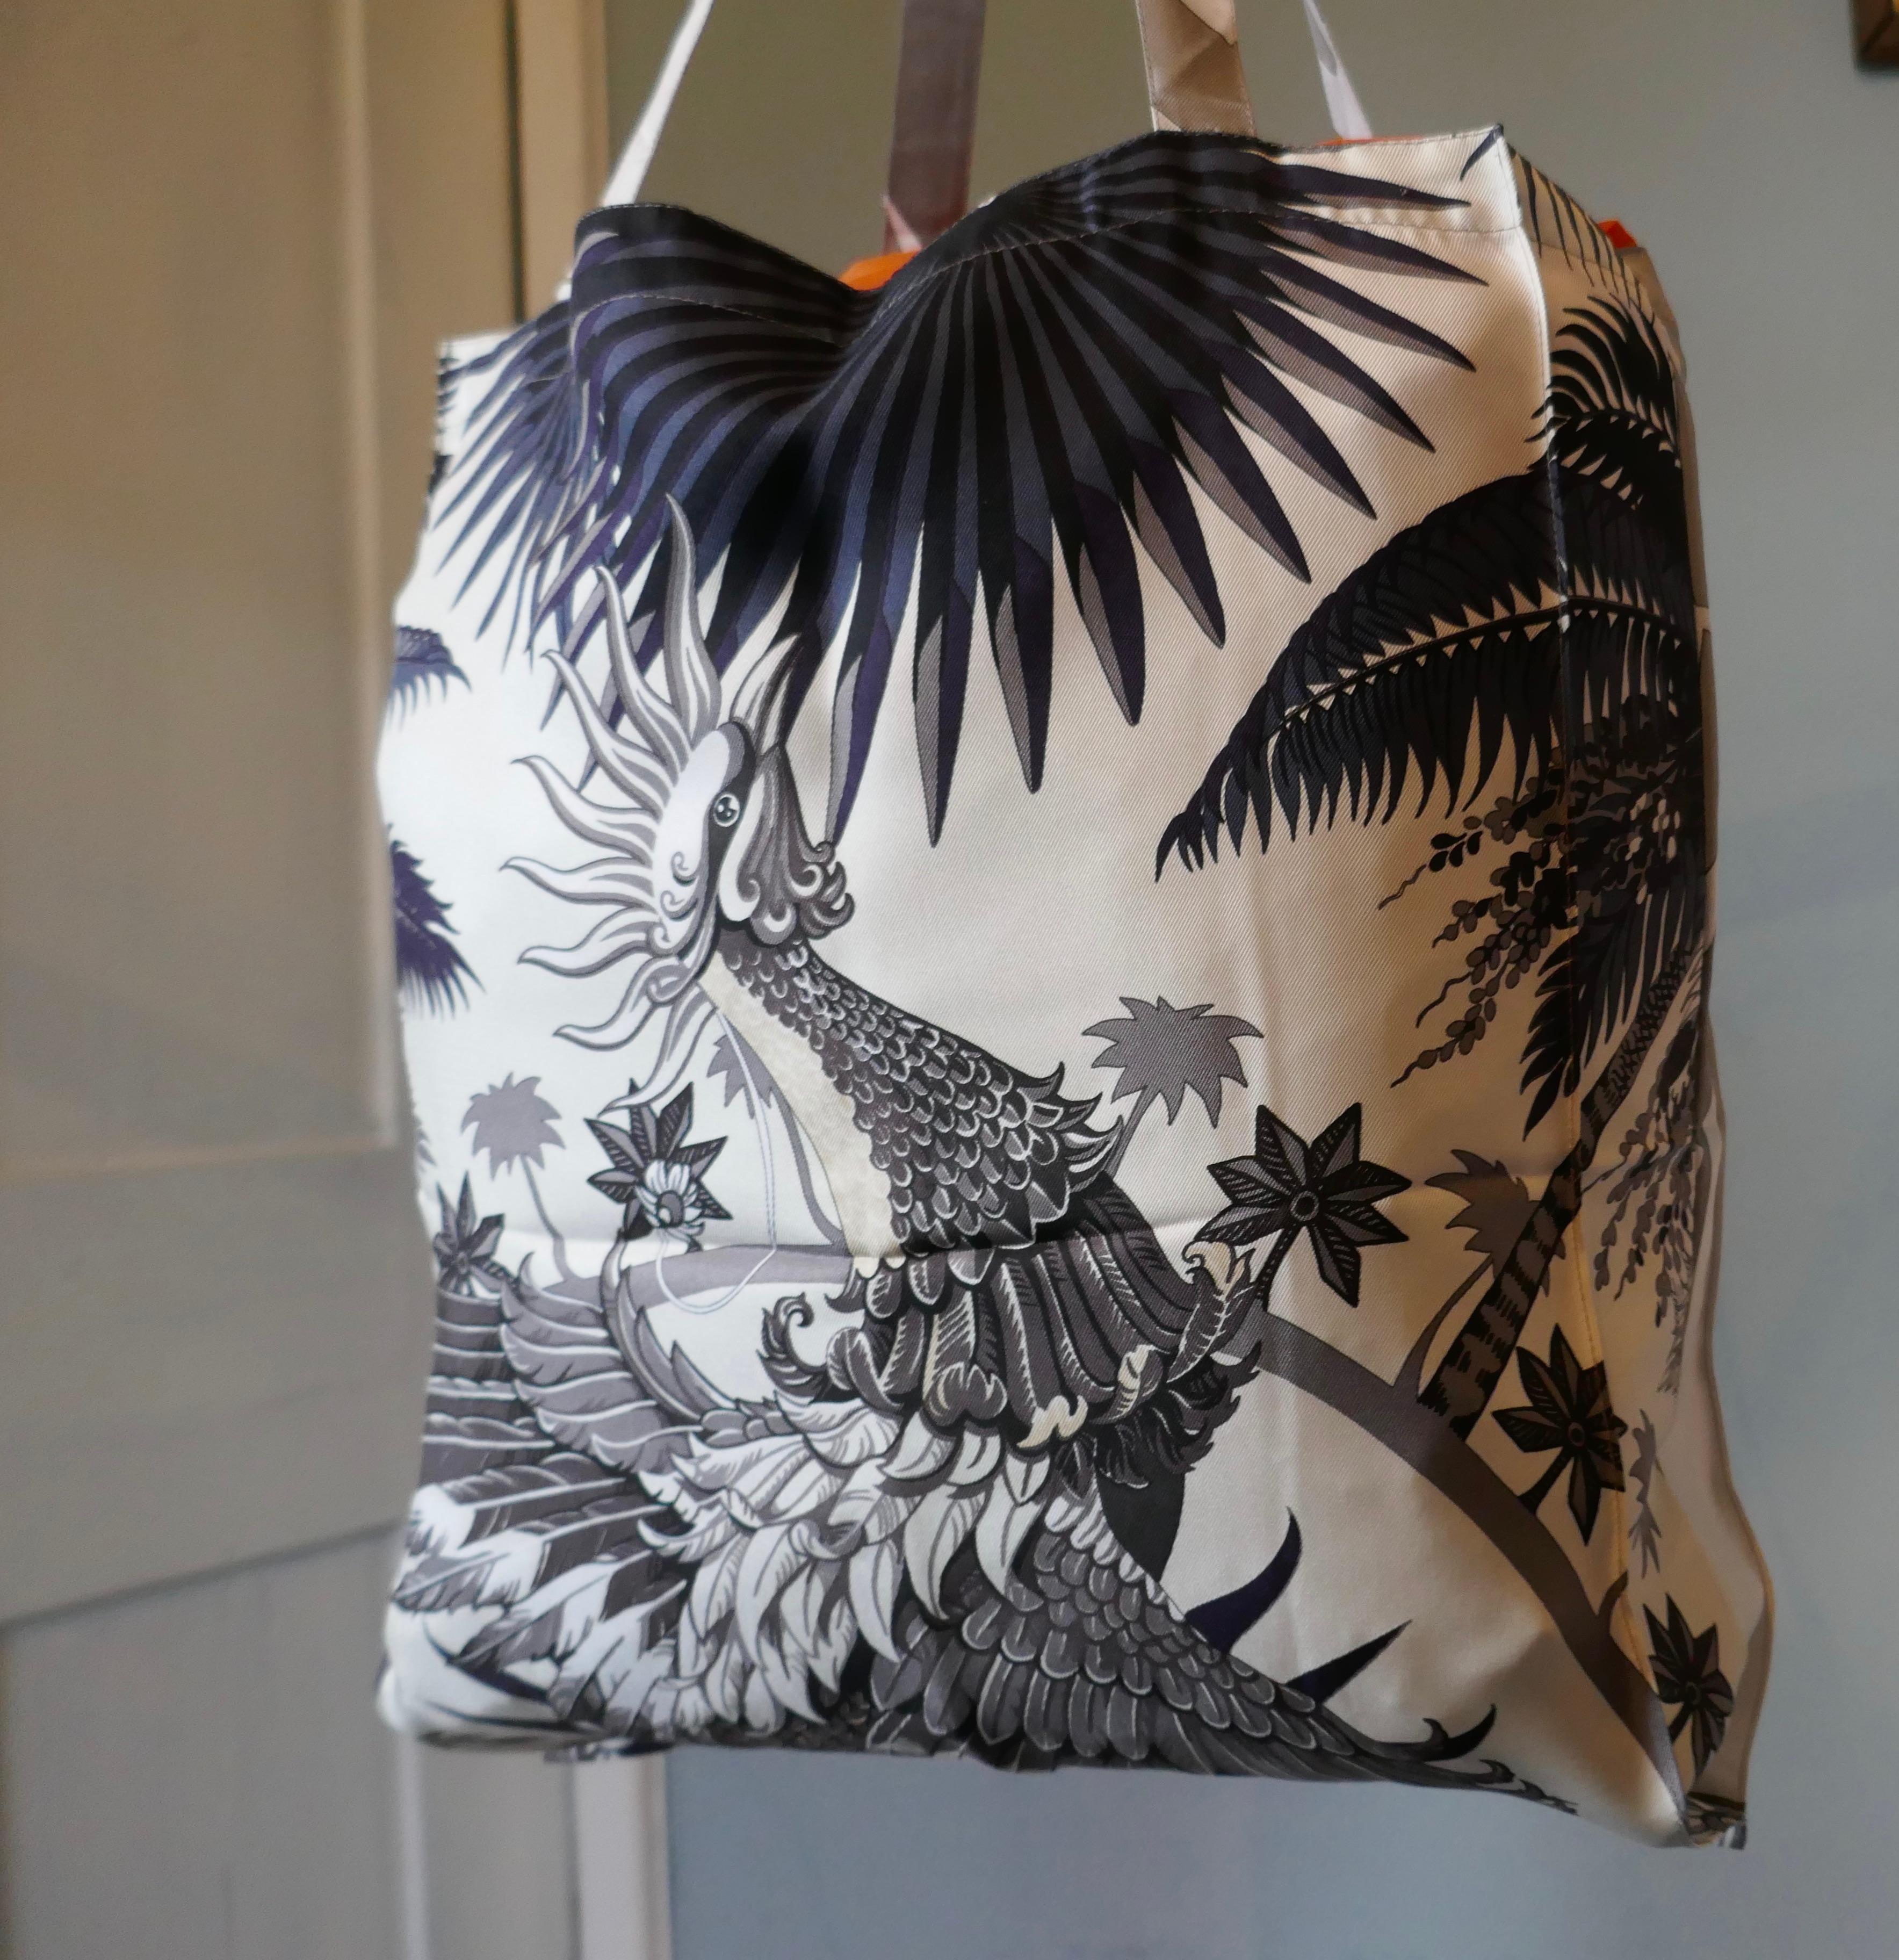 Black Hermes “Mythiques Phoenix” by Laurence Bourthoumieux Twill Silk Shopping Bag 